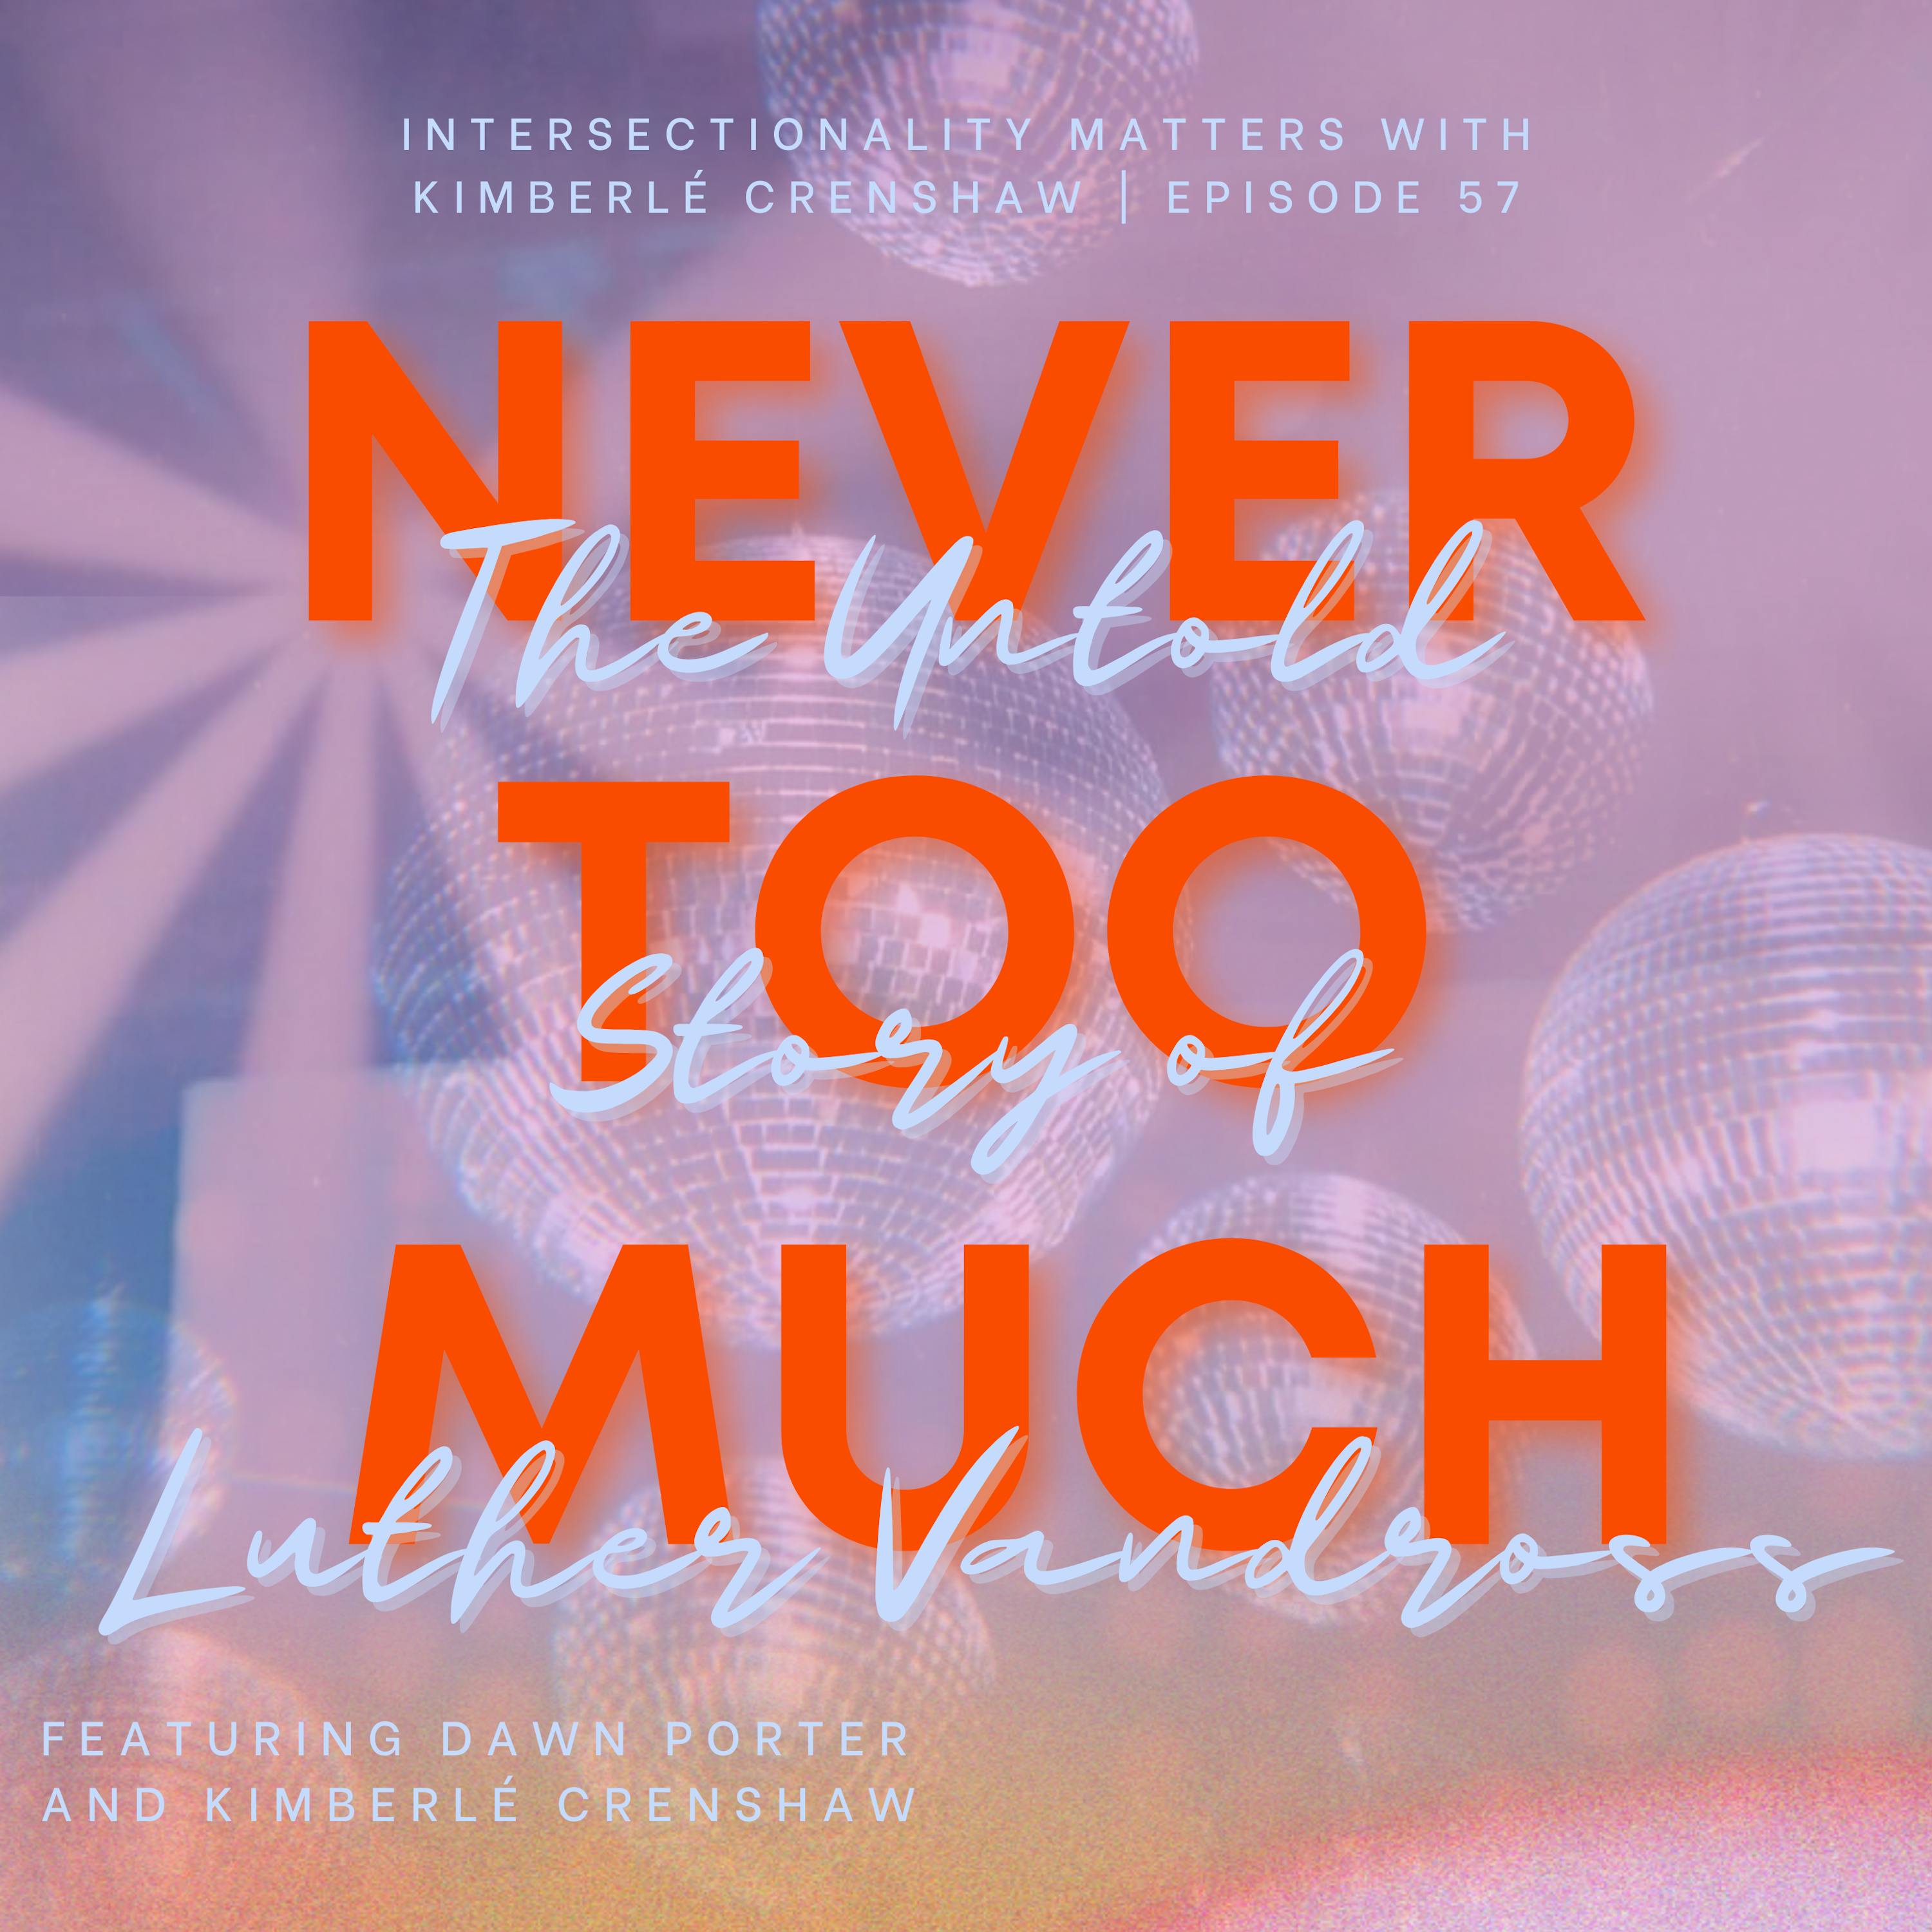 57. Never Too Much: The Untold Story of Luther Vandross